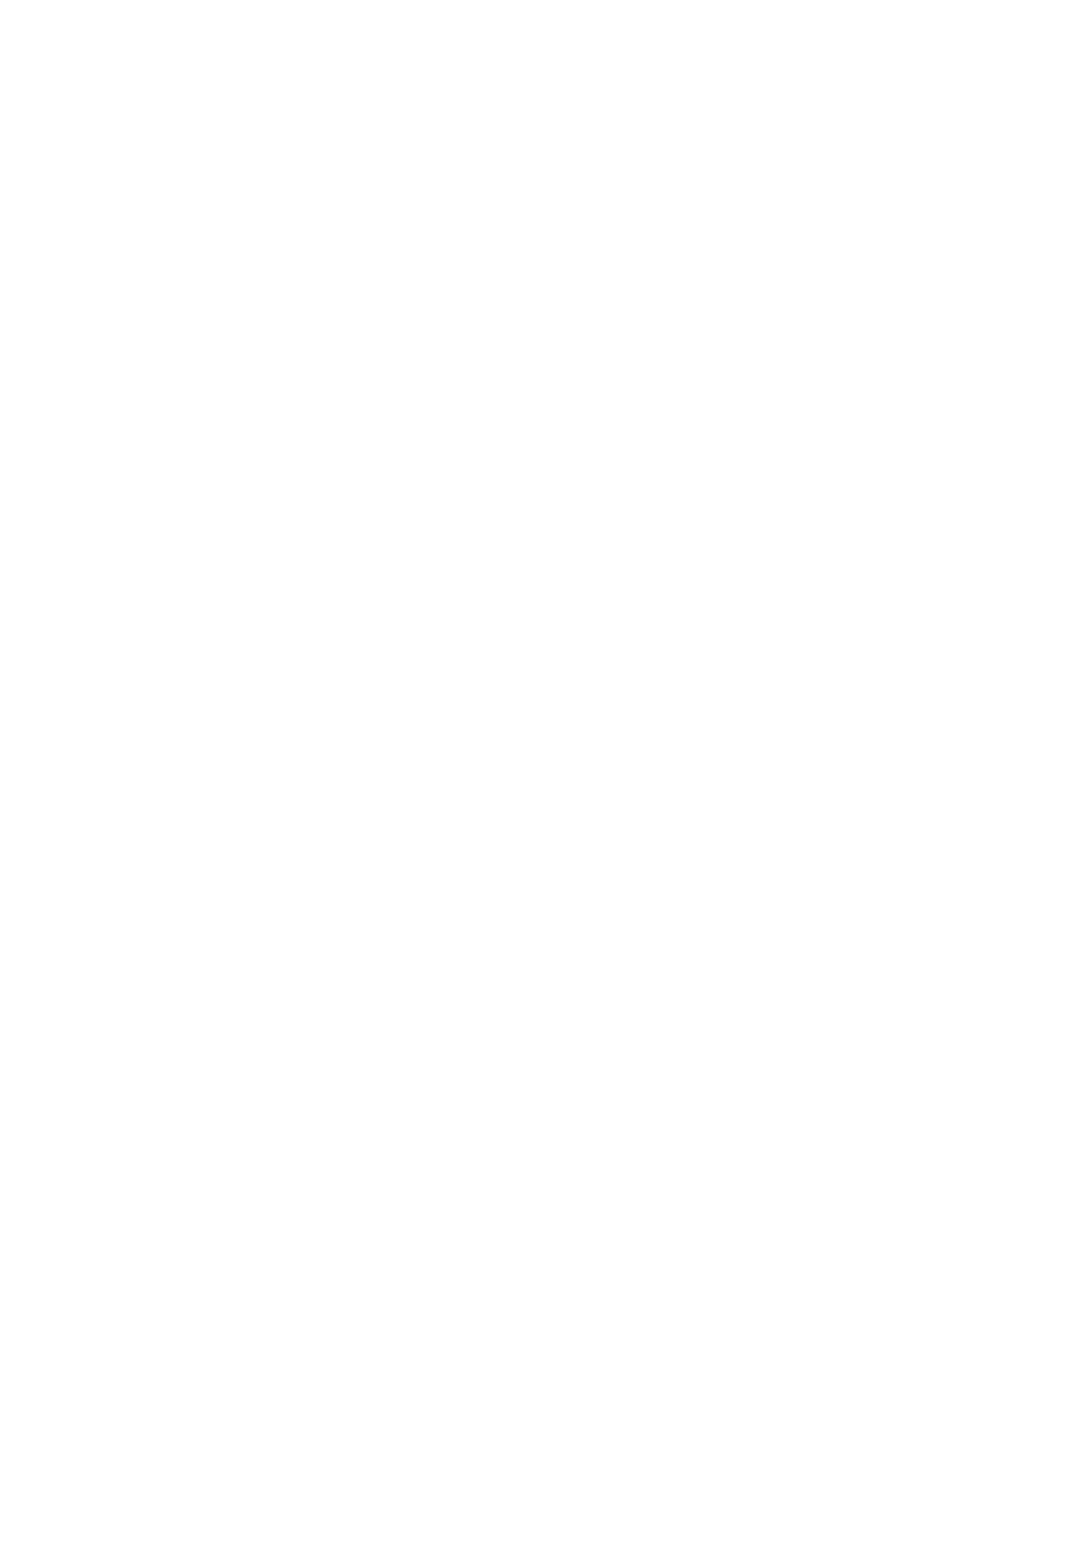 outlined head of a person with a question mark